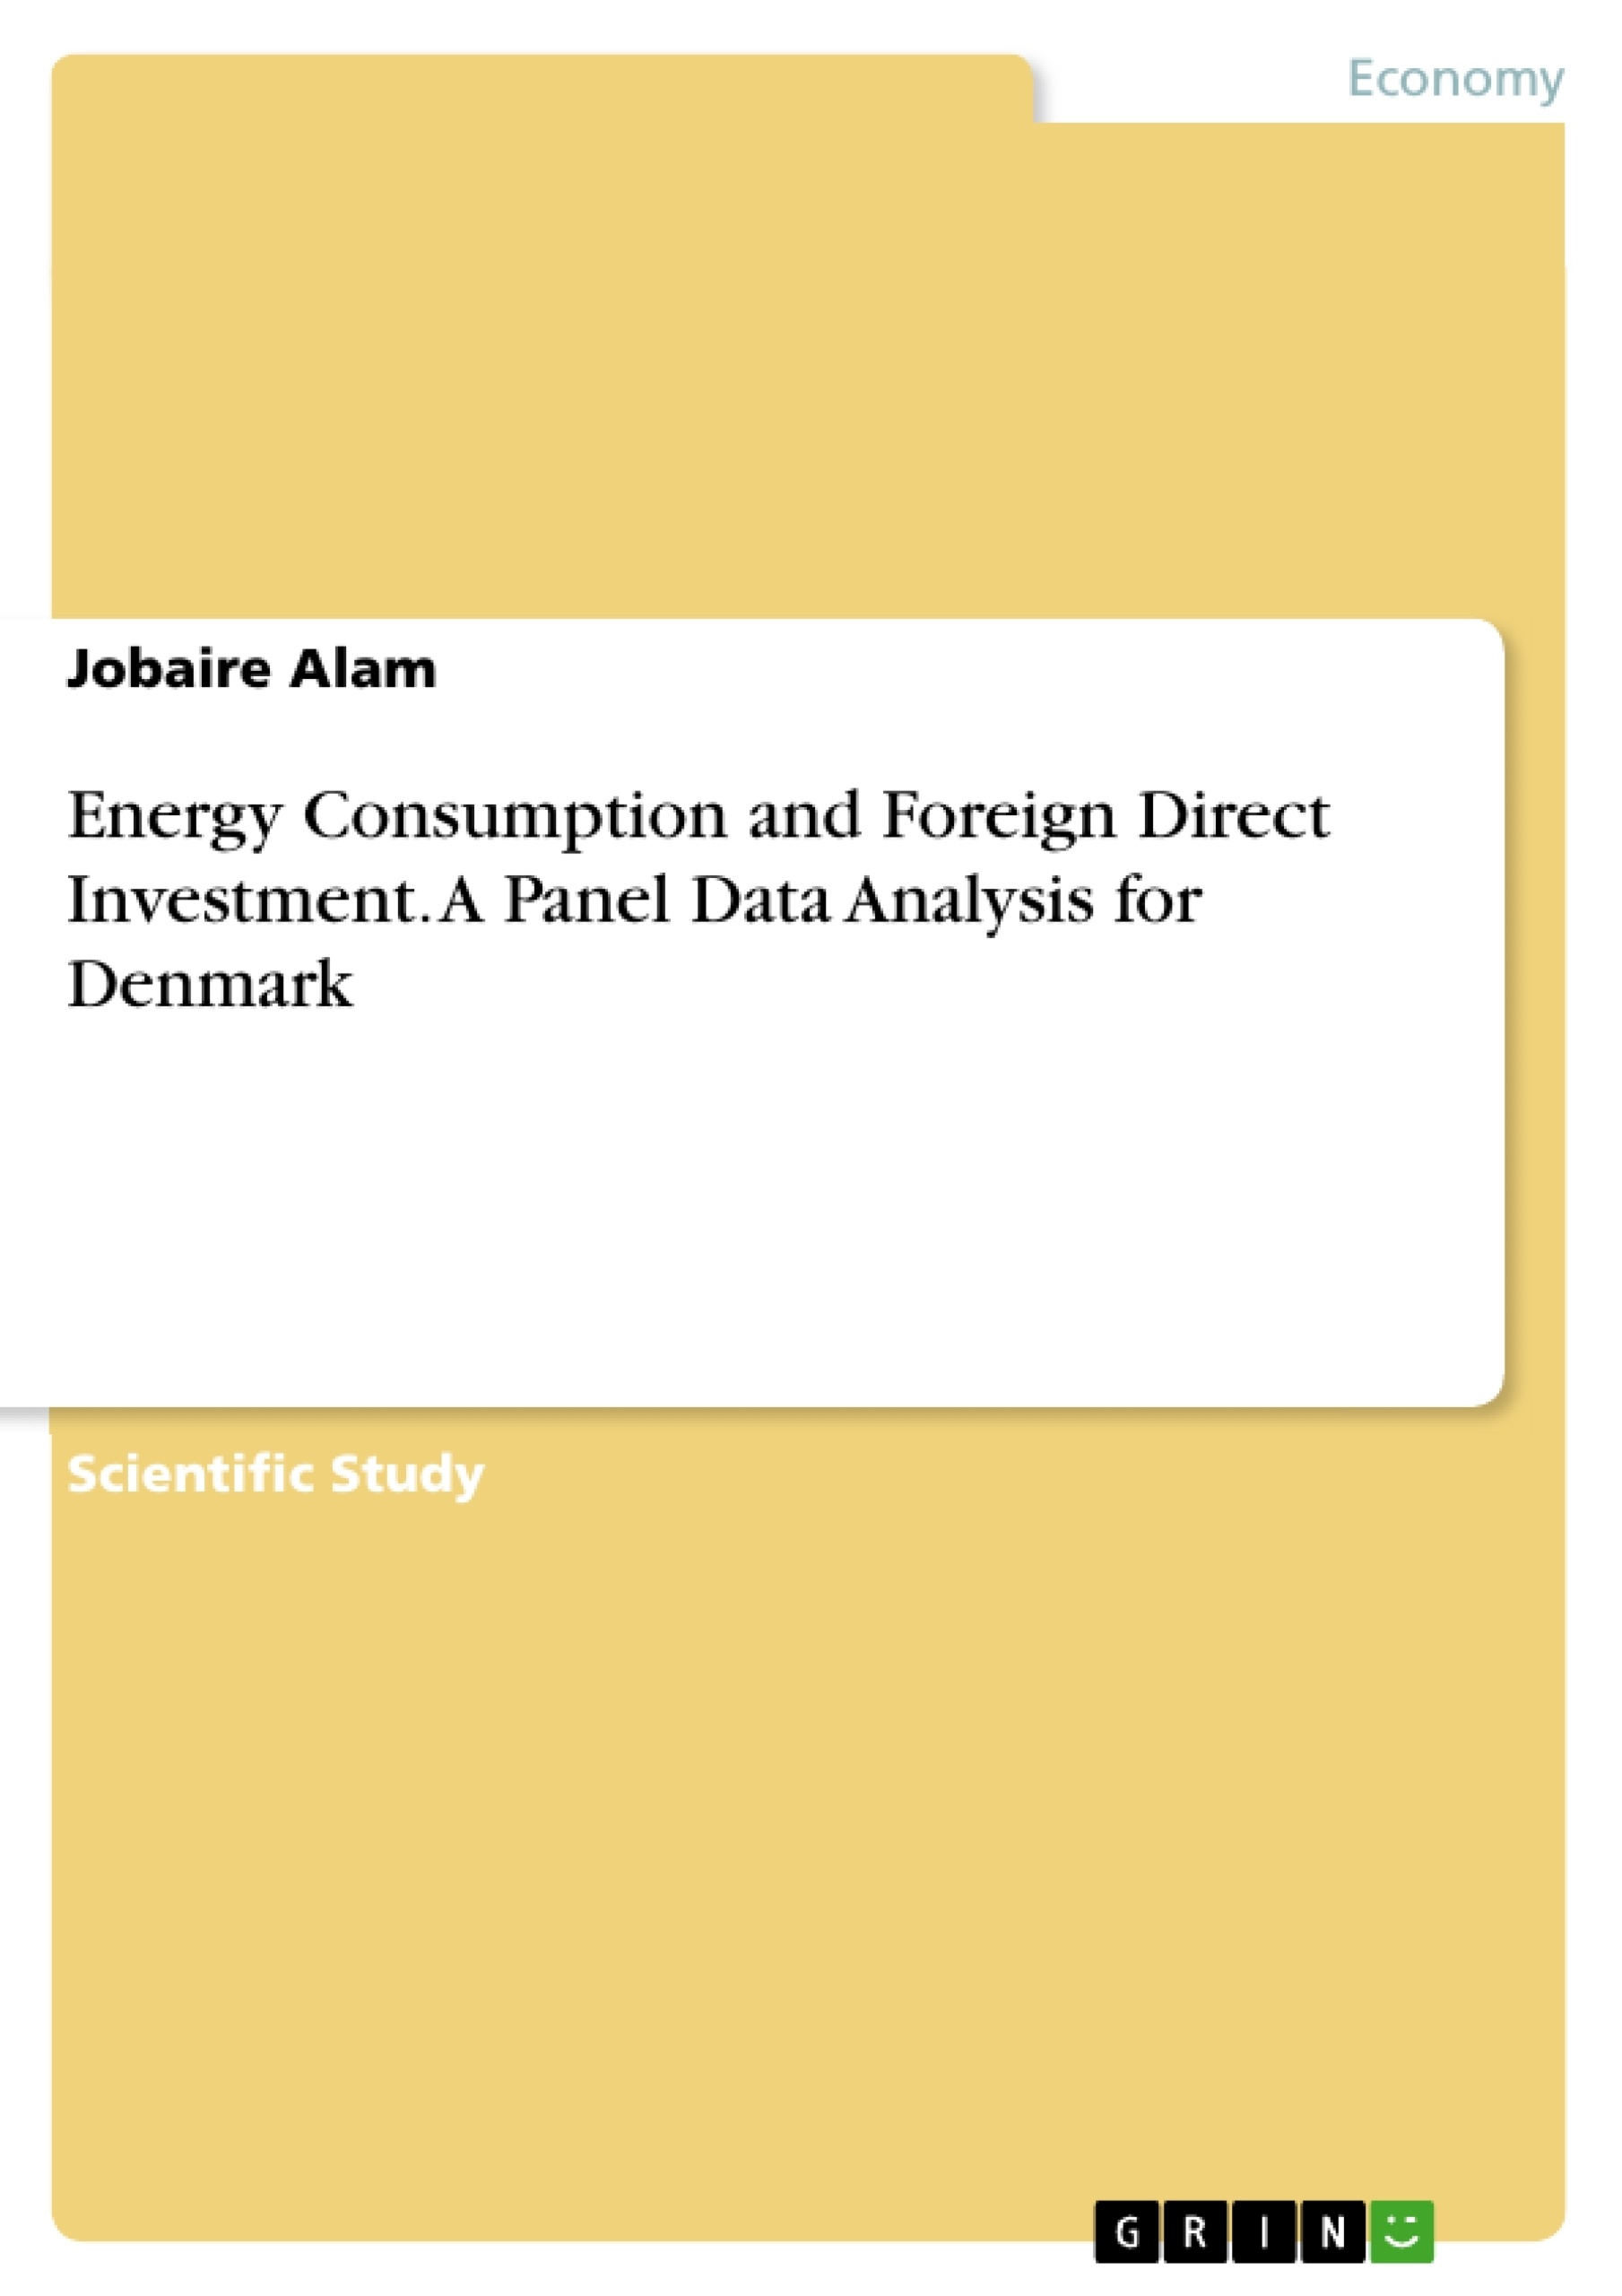 Titel: Energy Consumption and Foreign Direct Investment. A Panel Data Analysis for Denmark